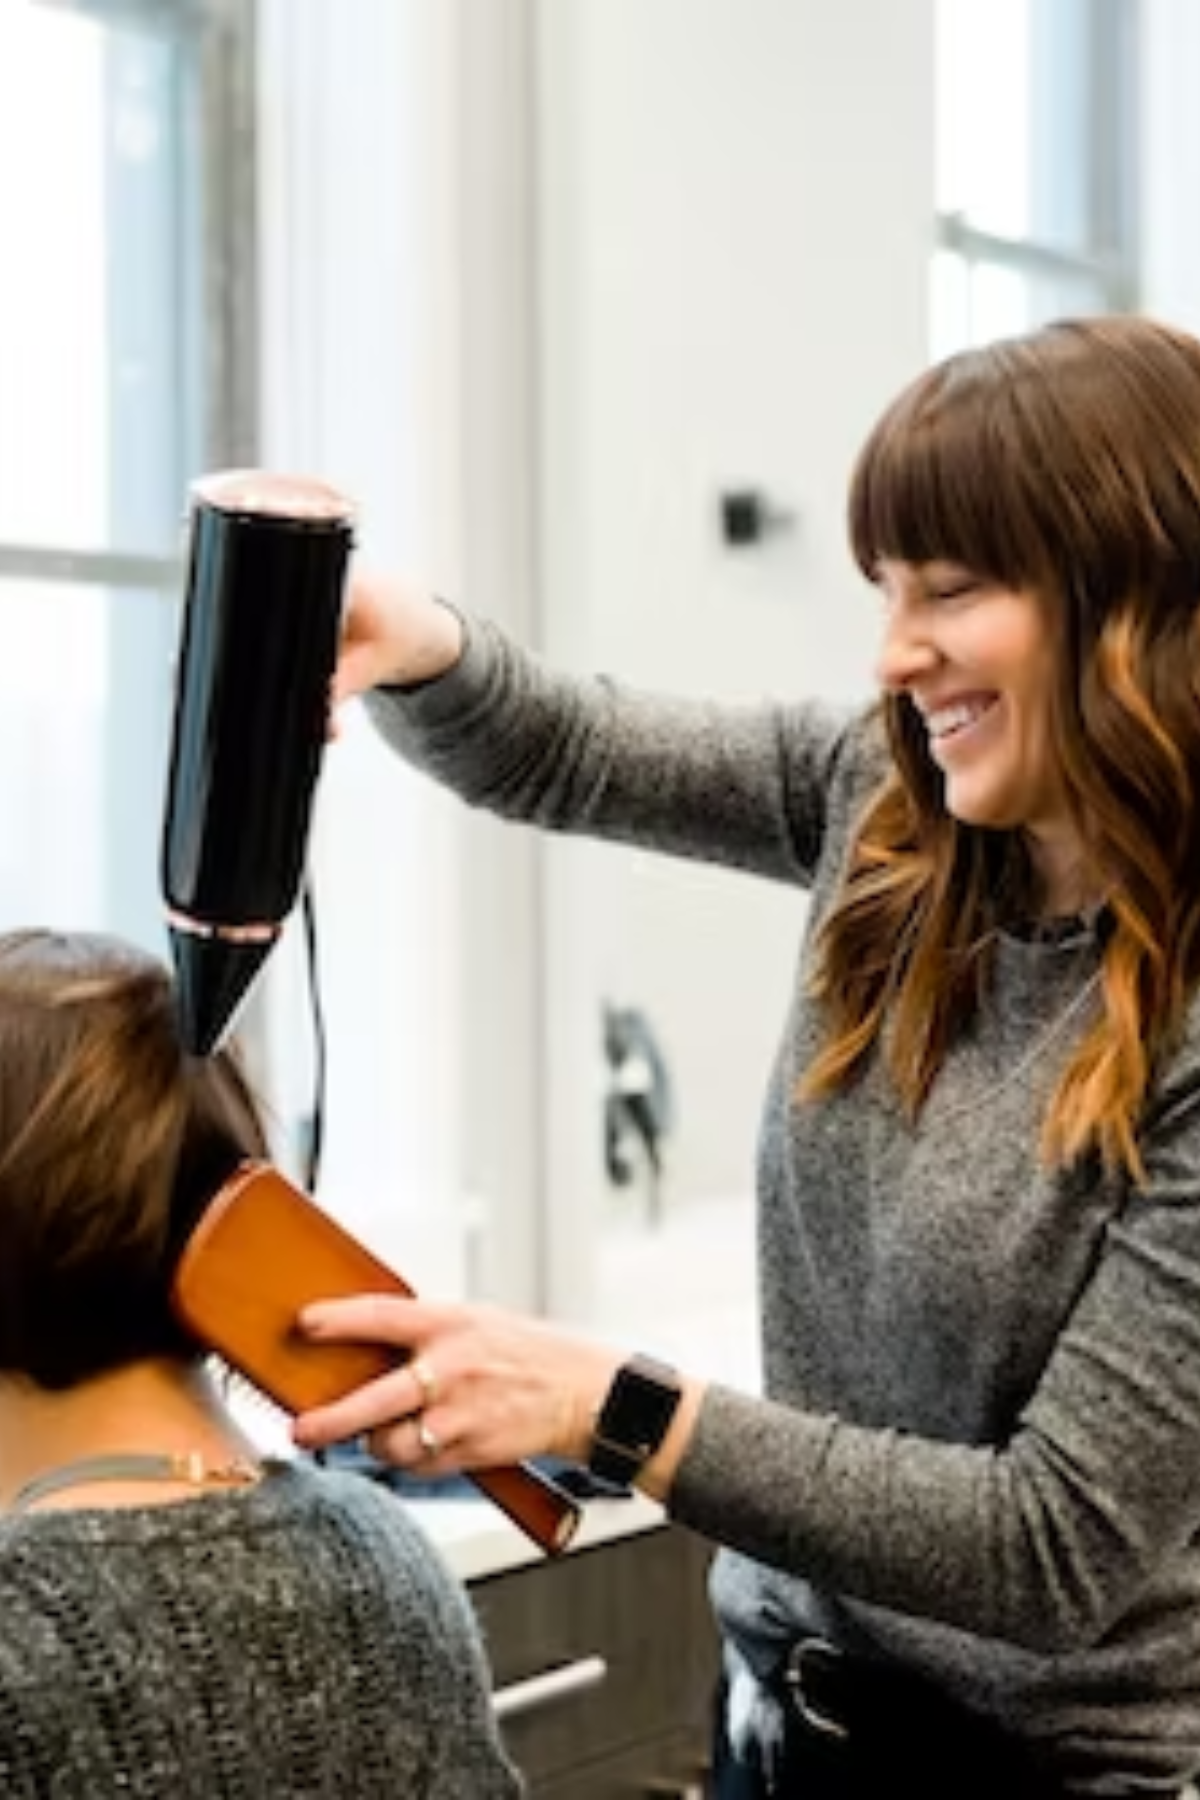 Dry Your Hair Faster and Smarter with an Infrared Hair Dryer